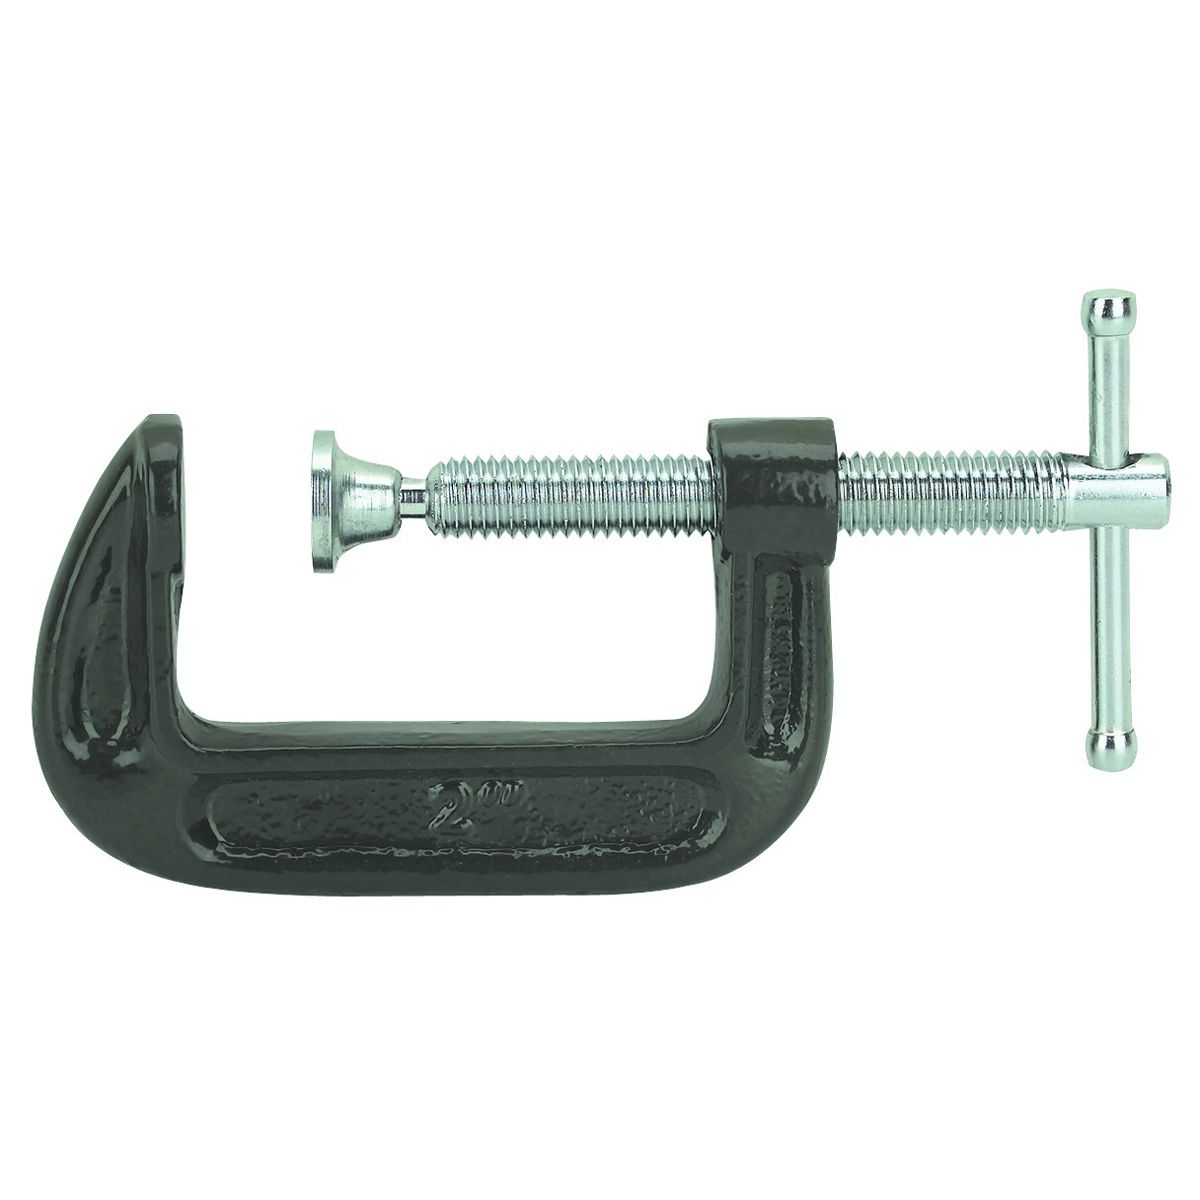 PITTSBURGH 2" Industrial C-Clamp